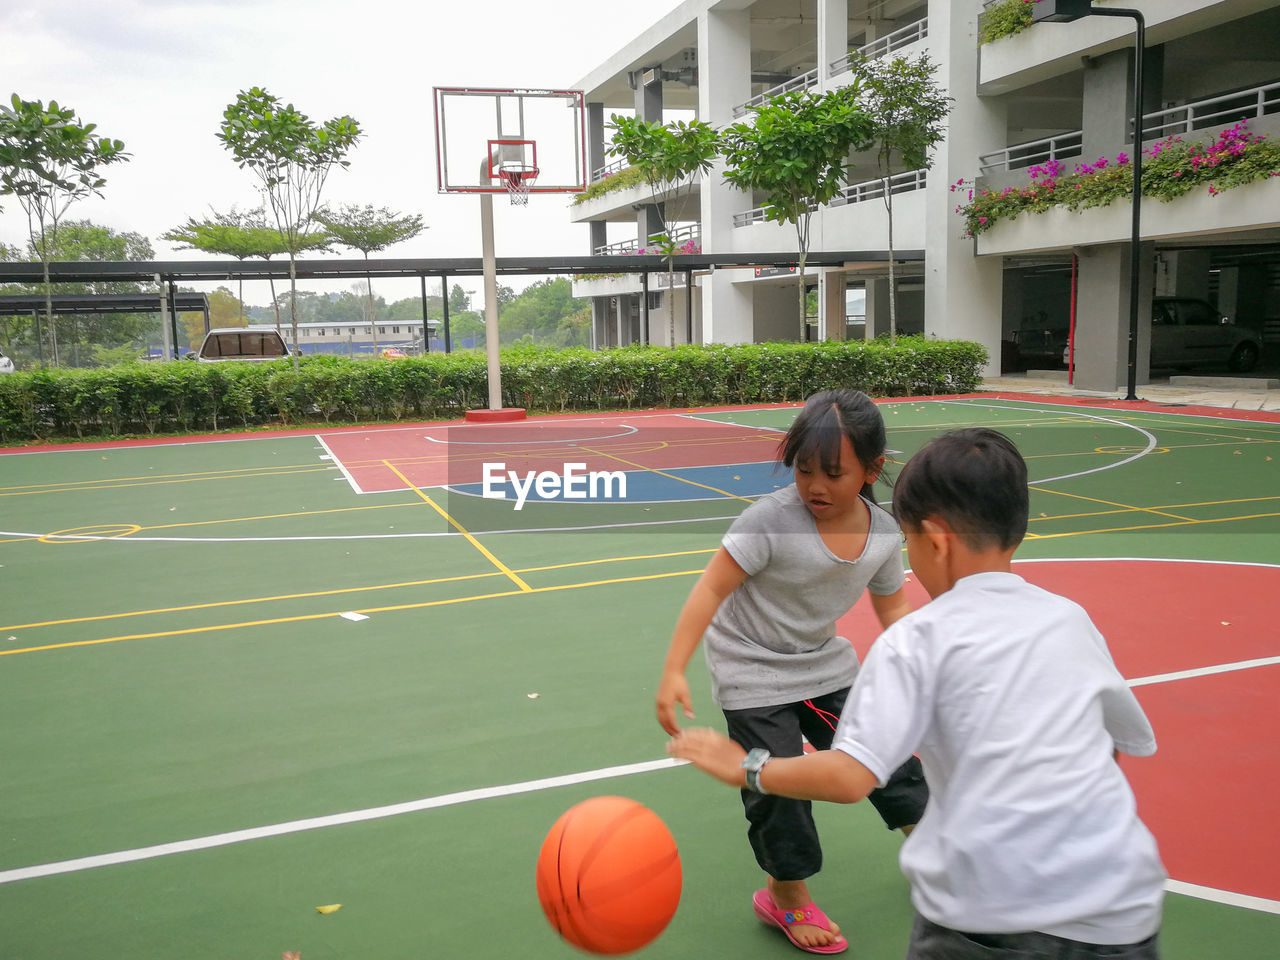 Girl playing basketball with brother at court